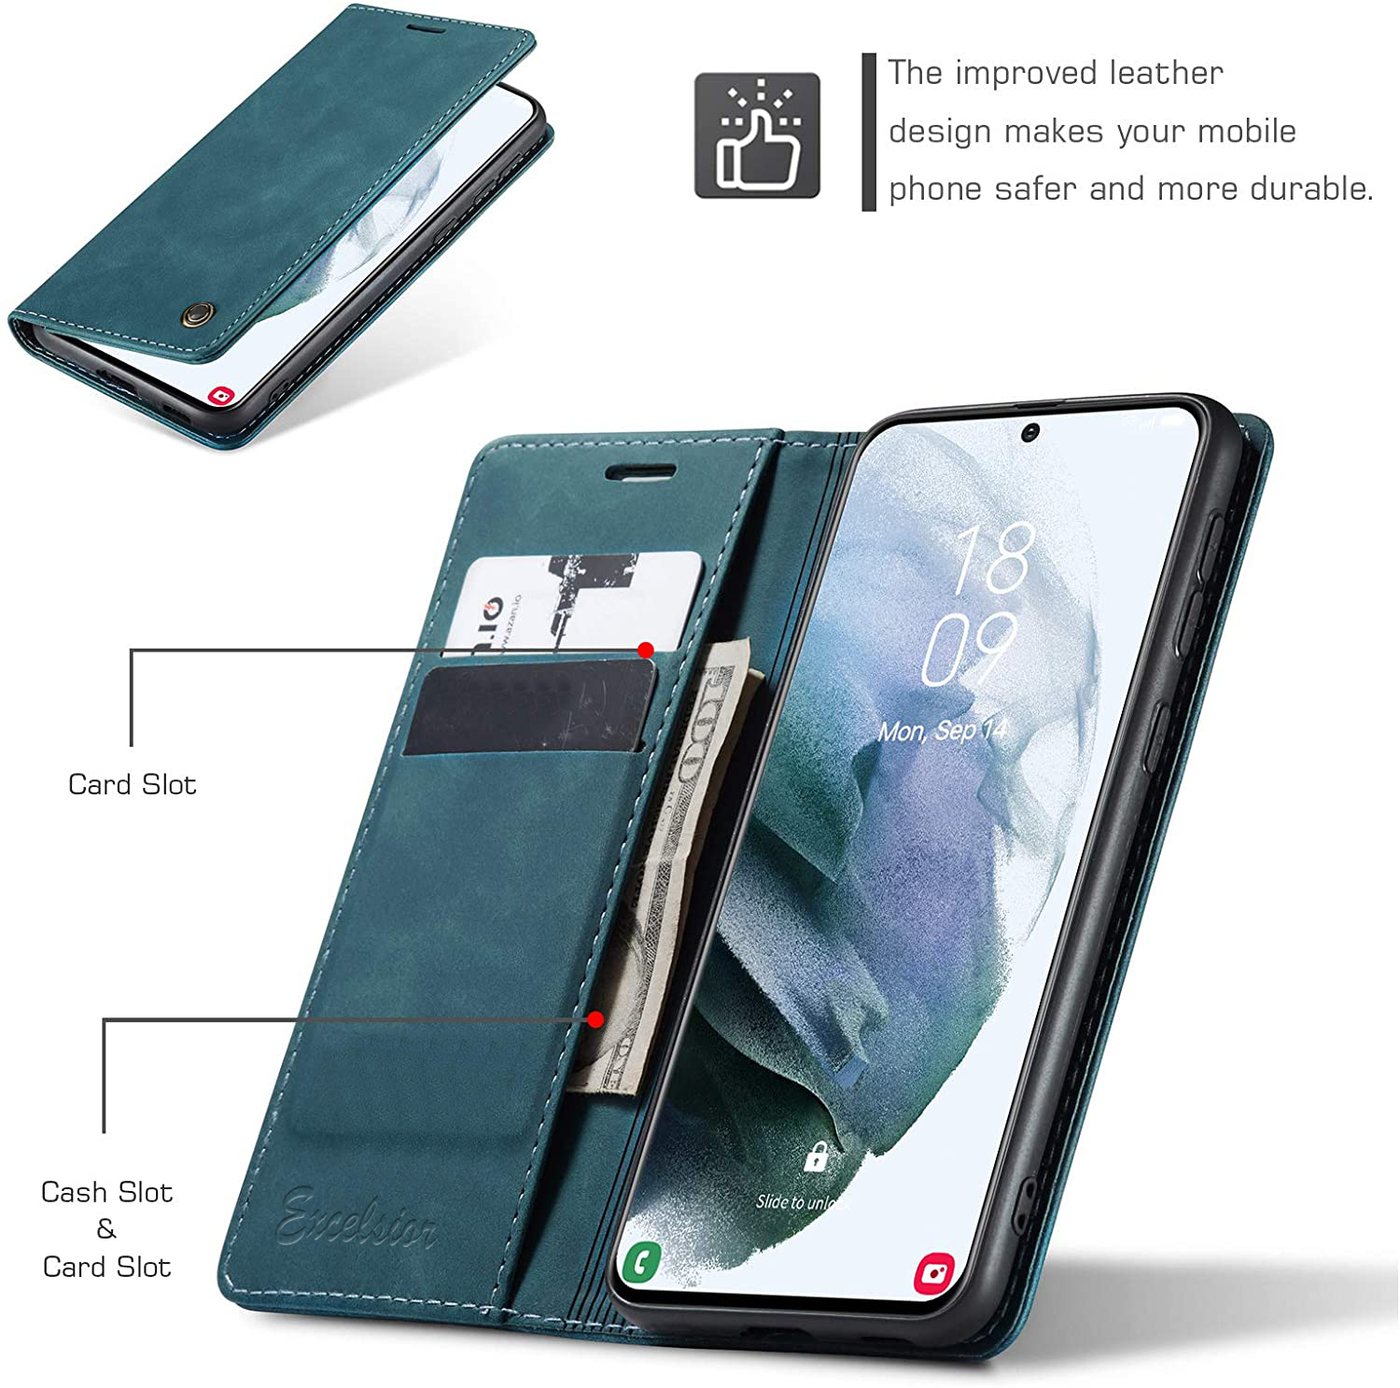 Samsung Galaxy S21 5G Leather Wallet flip case cover with card slots by Excelsior